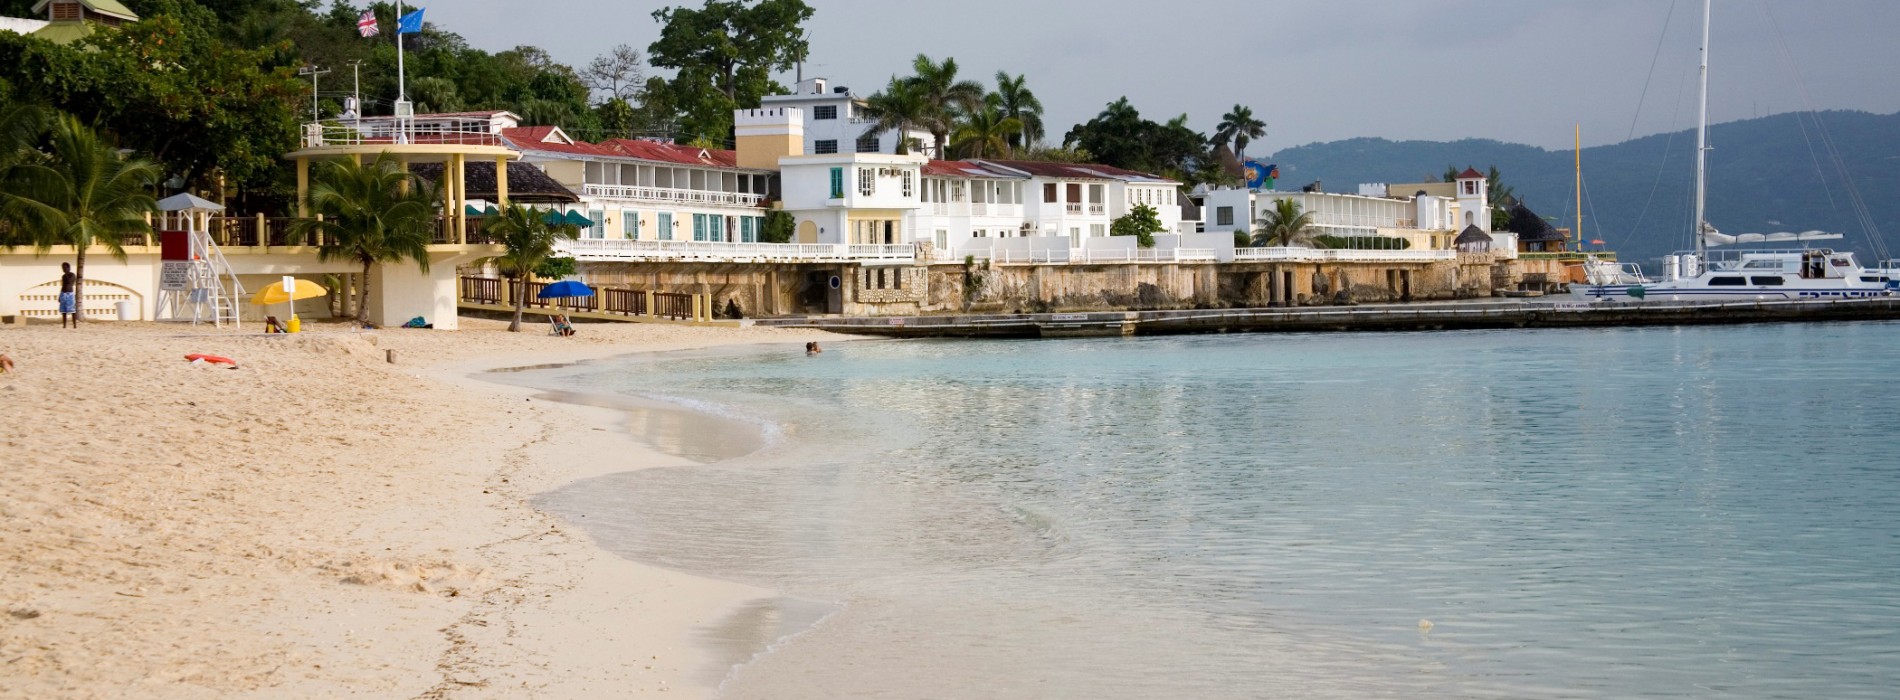 Treat yourself to the Delights of Montego Bay, Jamaica